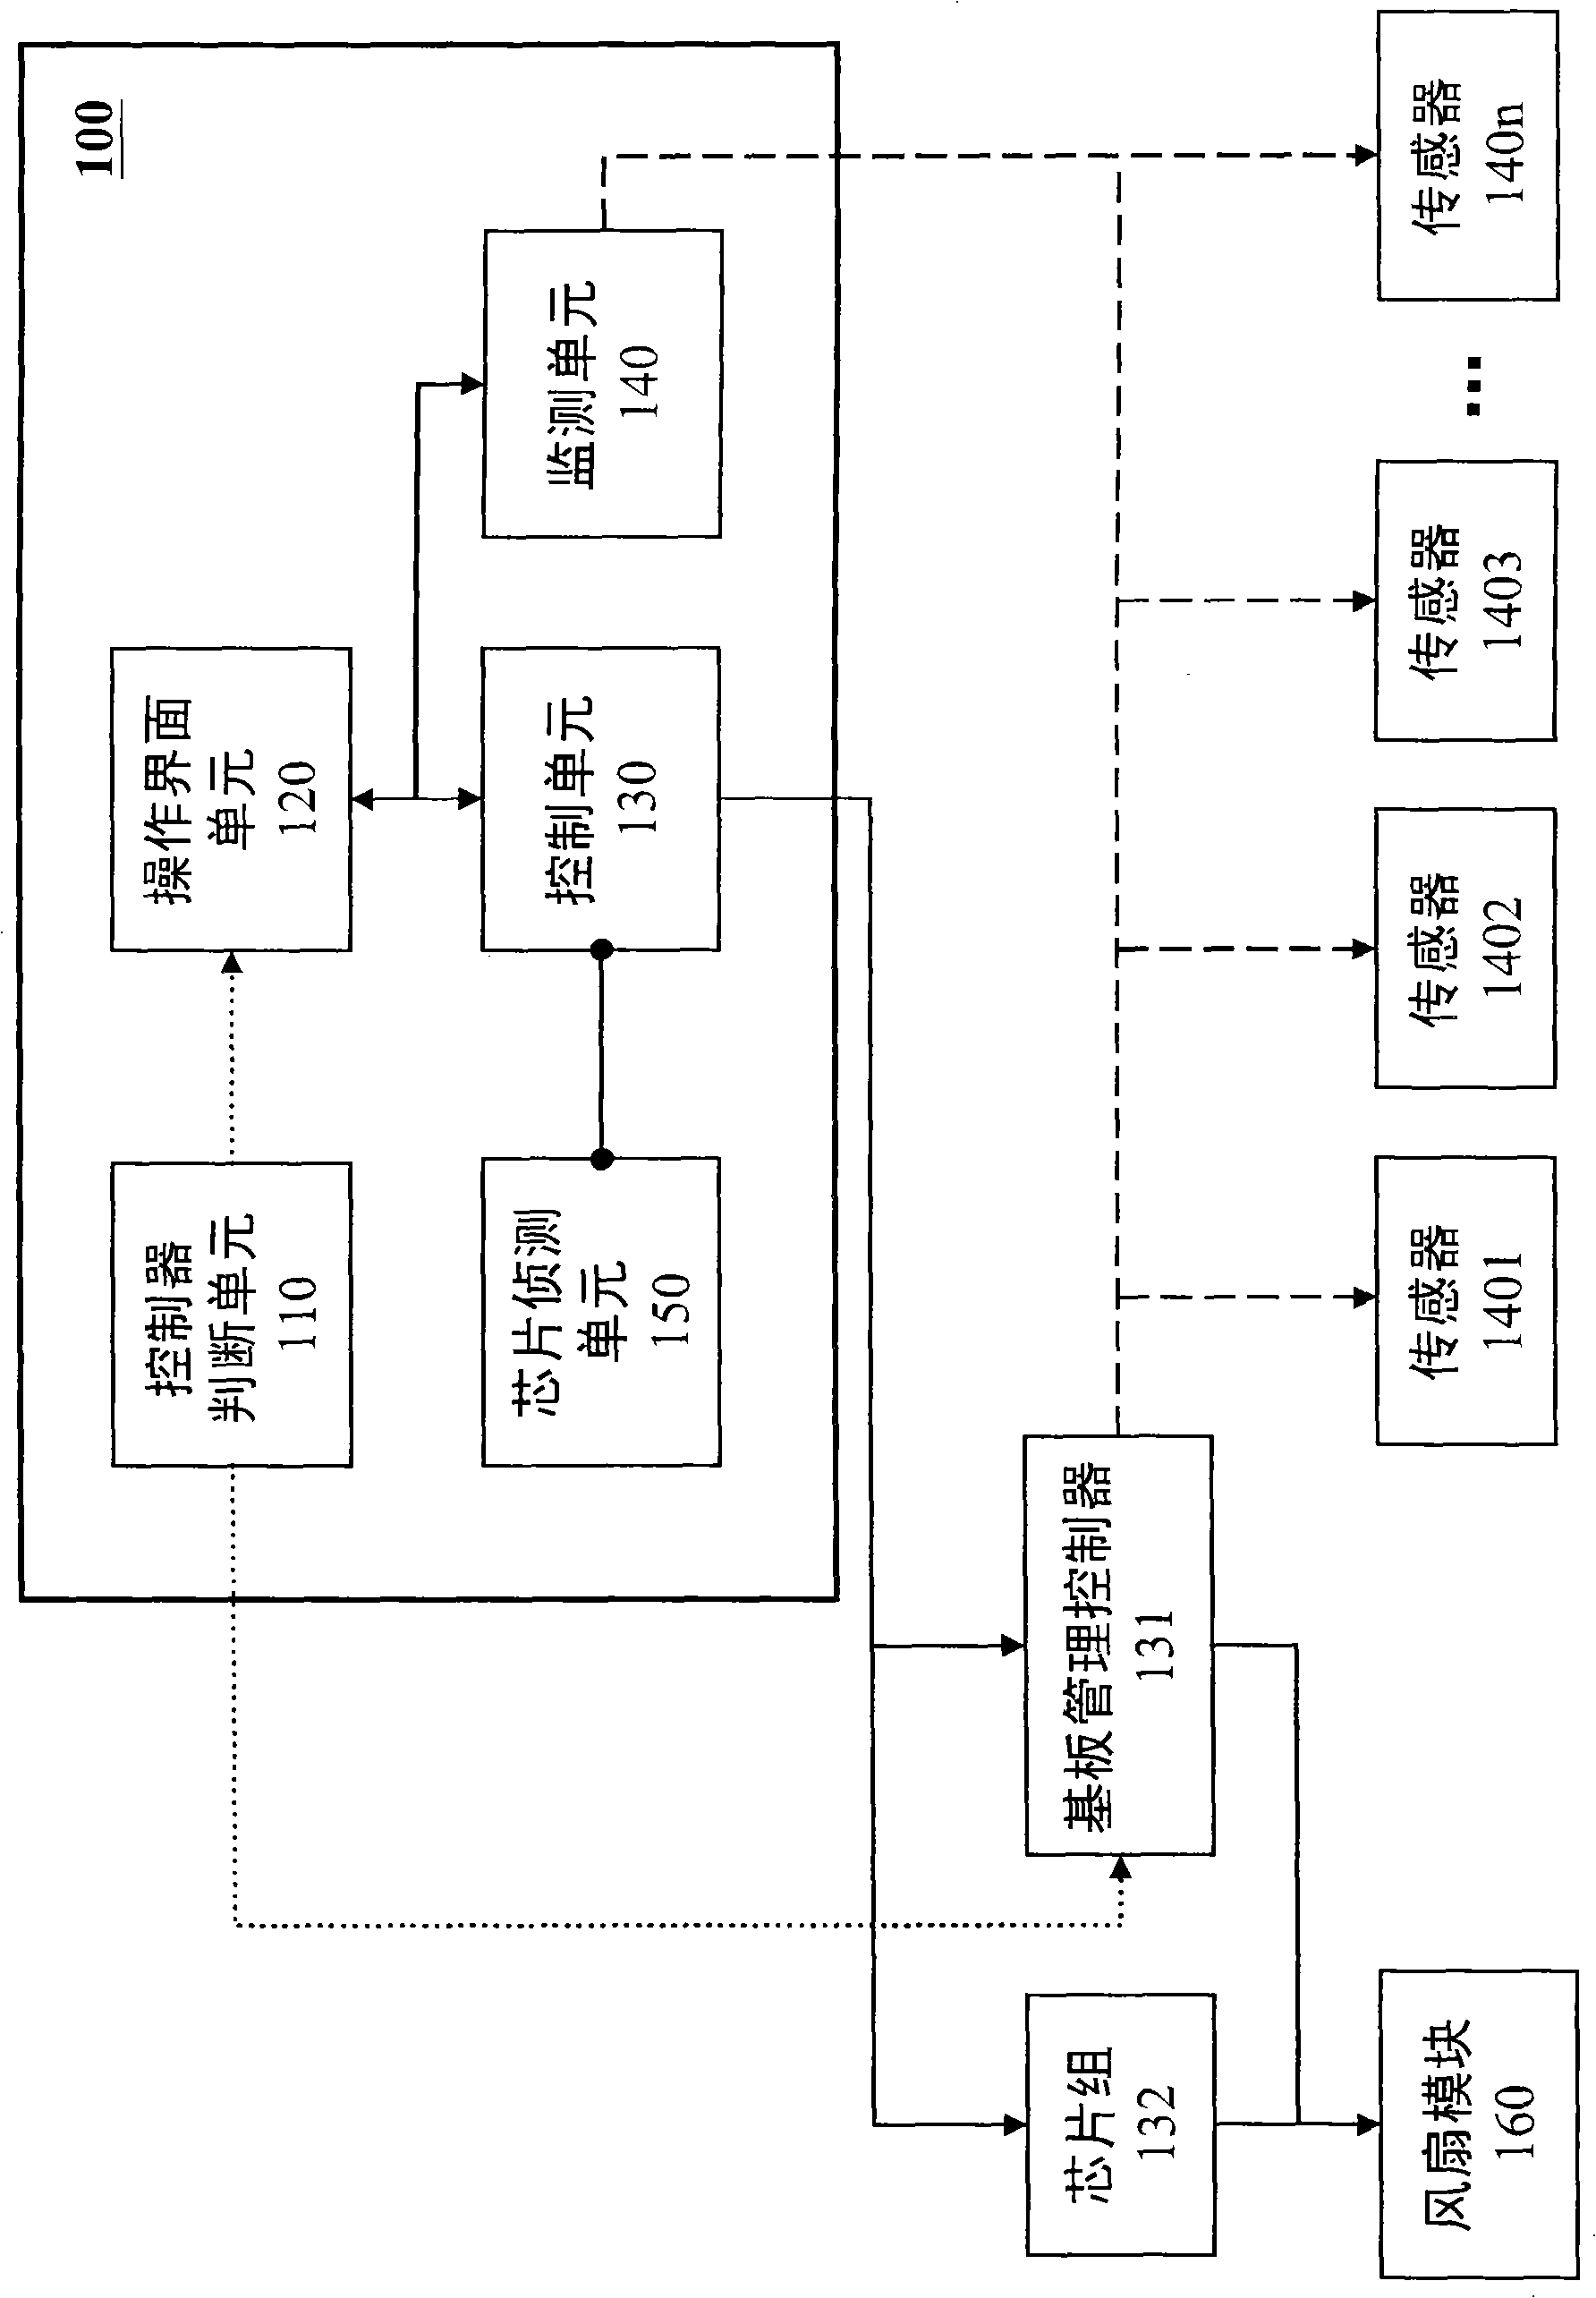 System hardware monitoring and simulation testing module and method thereof